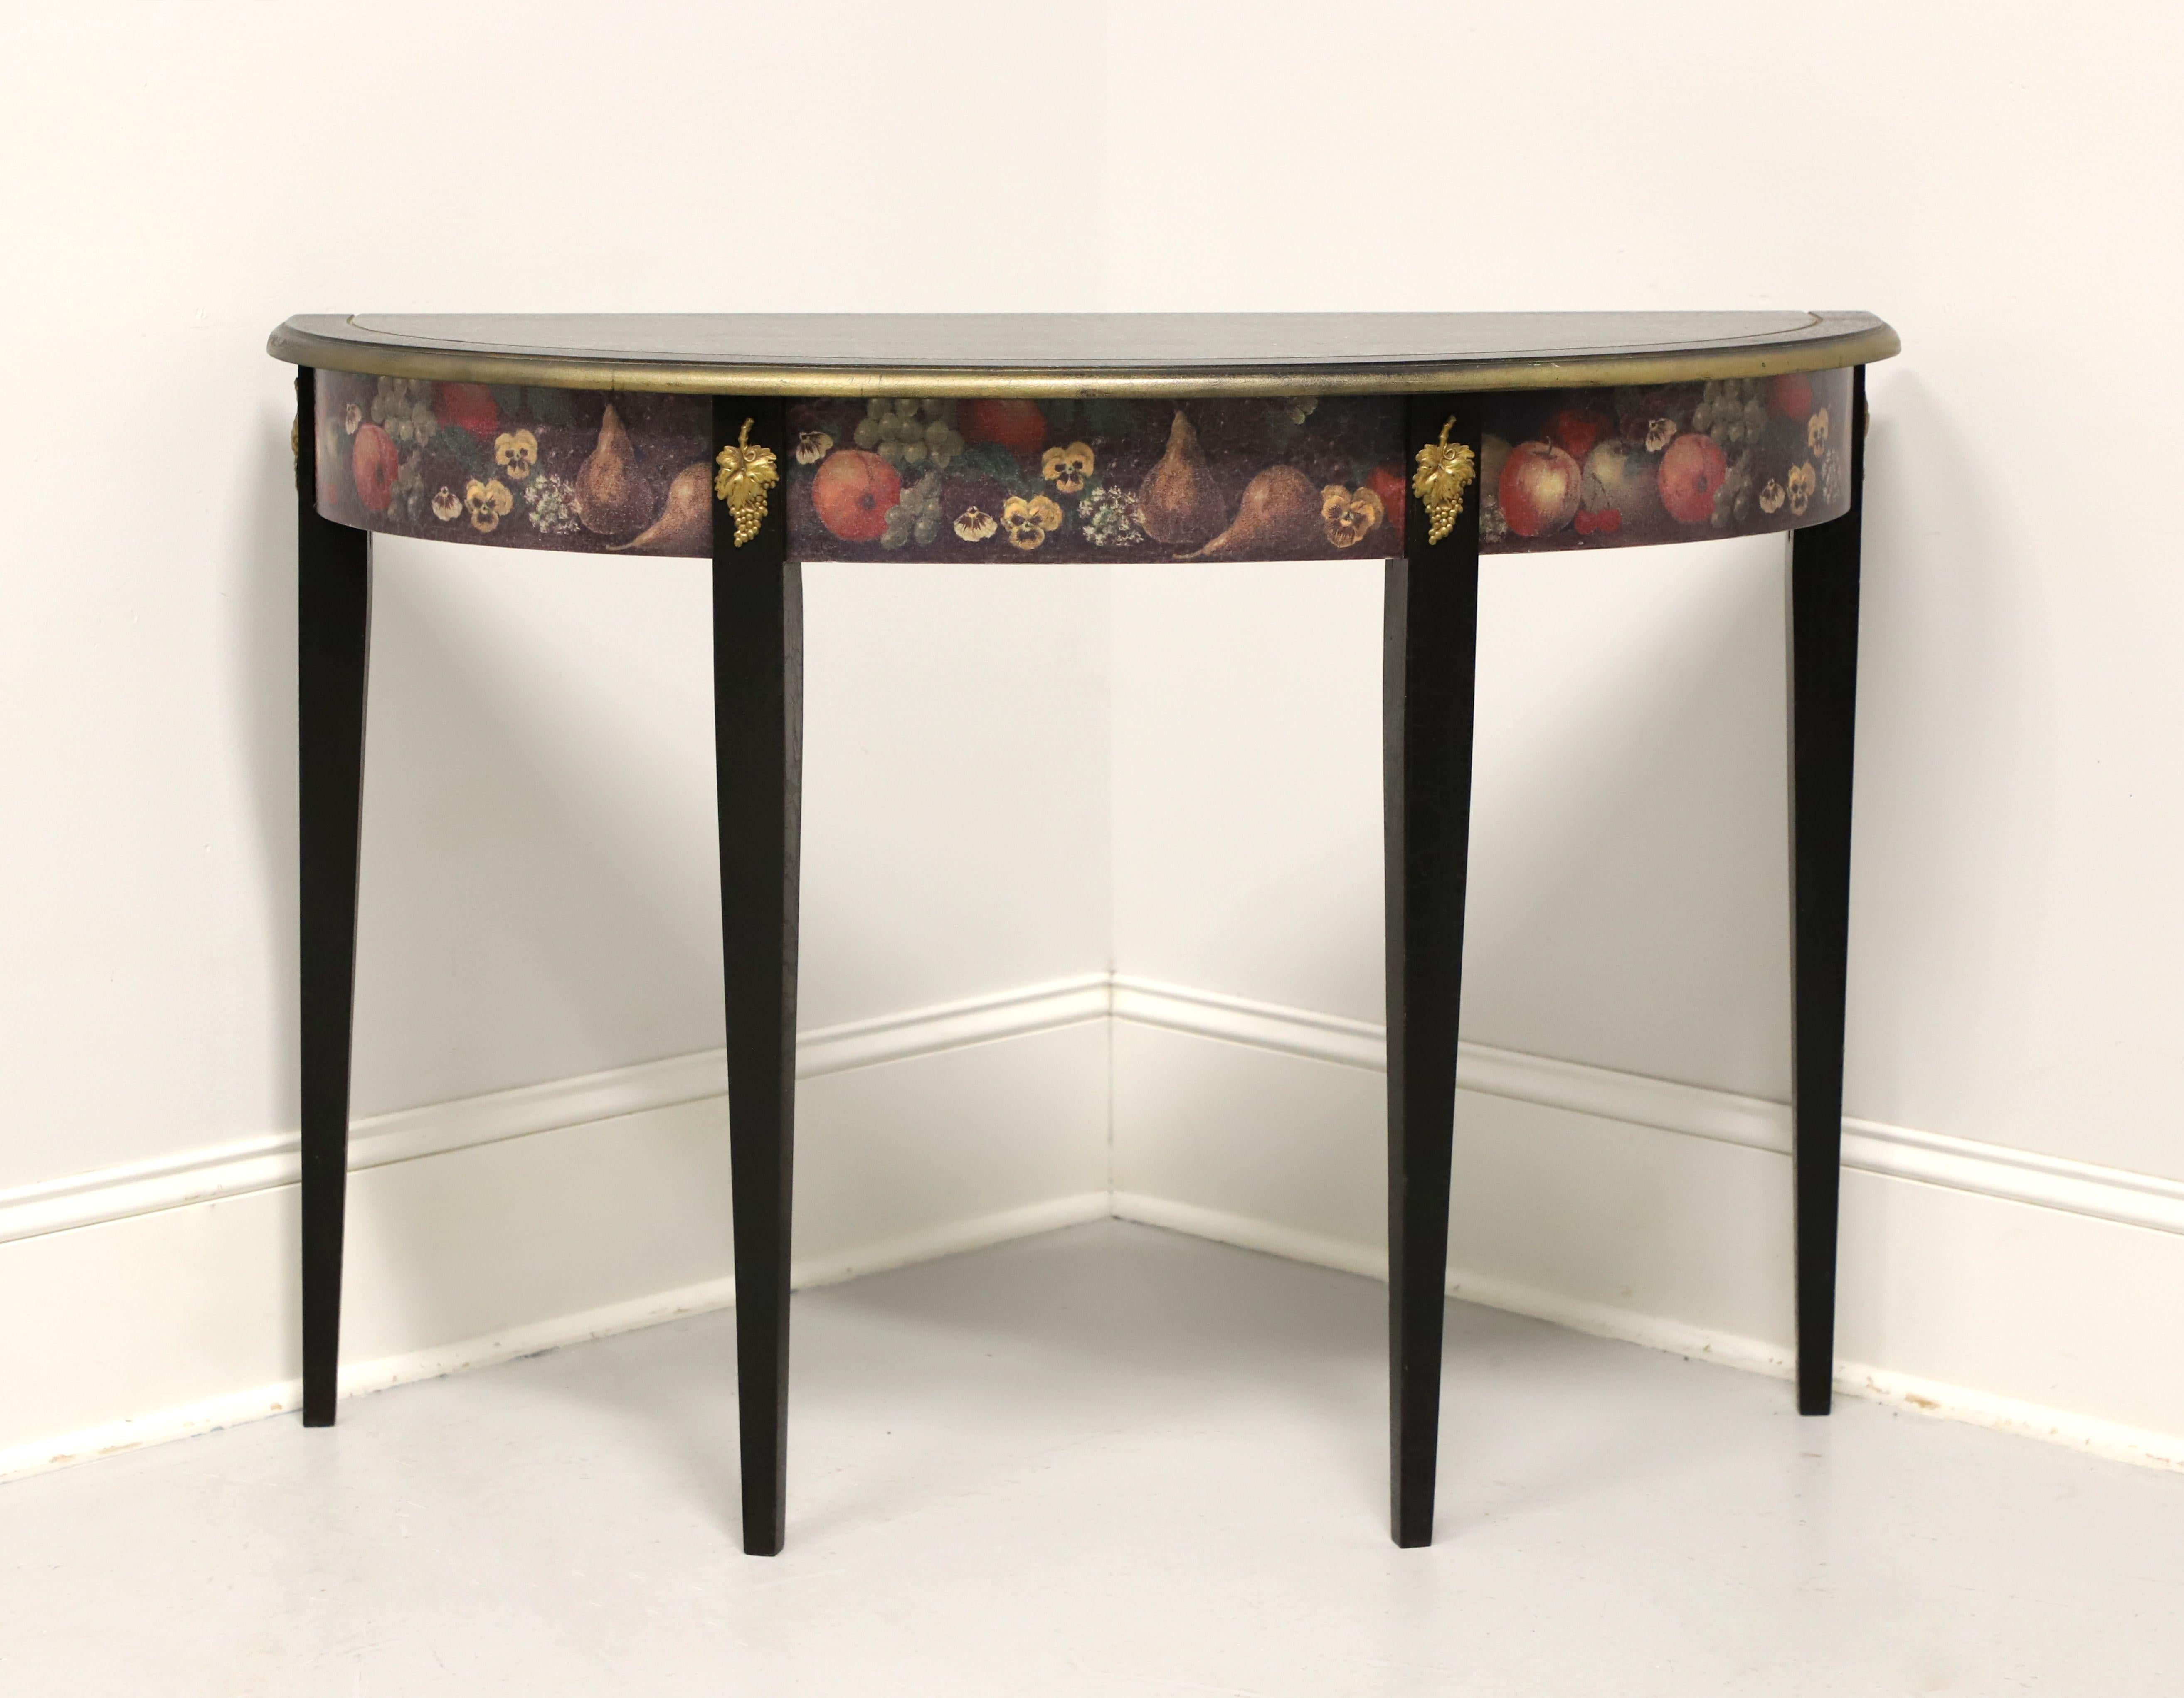 Painted Hepplewhite Style Fruit Motif Demilune Console Table For Sale 2